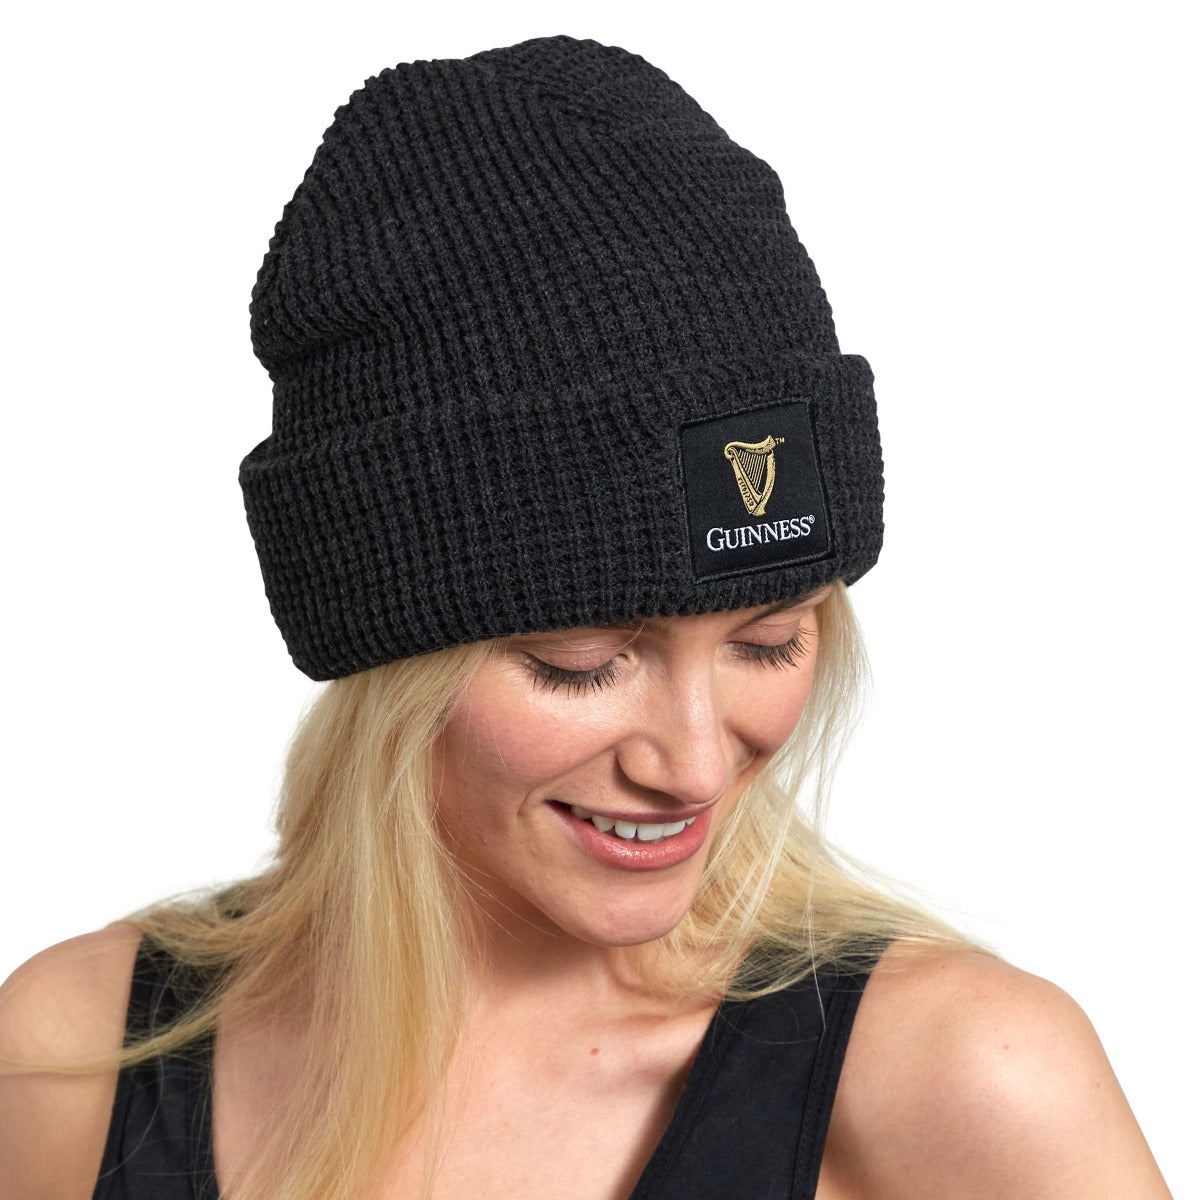 A woman wearing a Guinness Thinsulated Beanie.